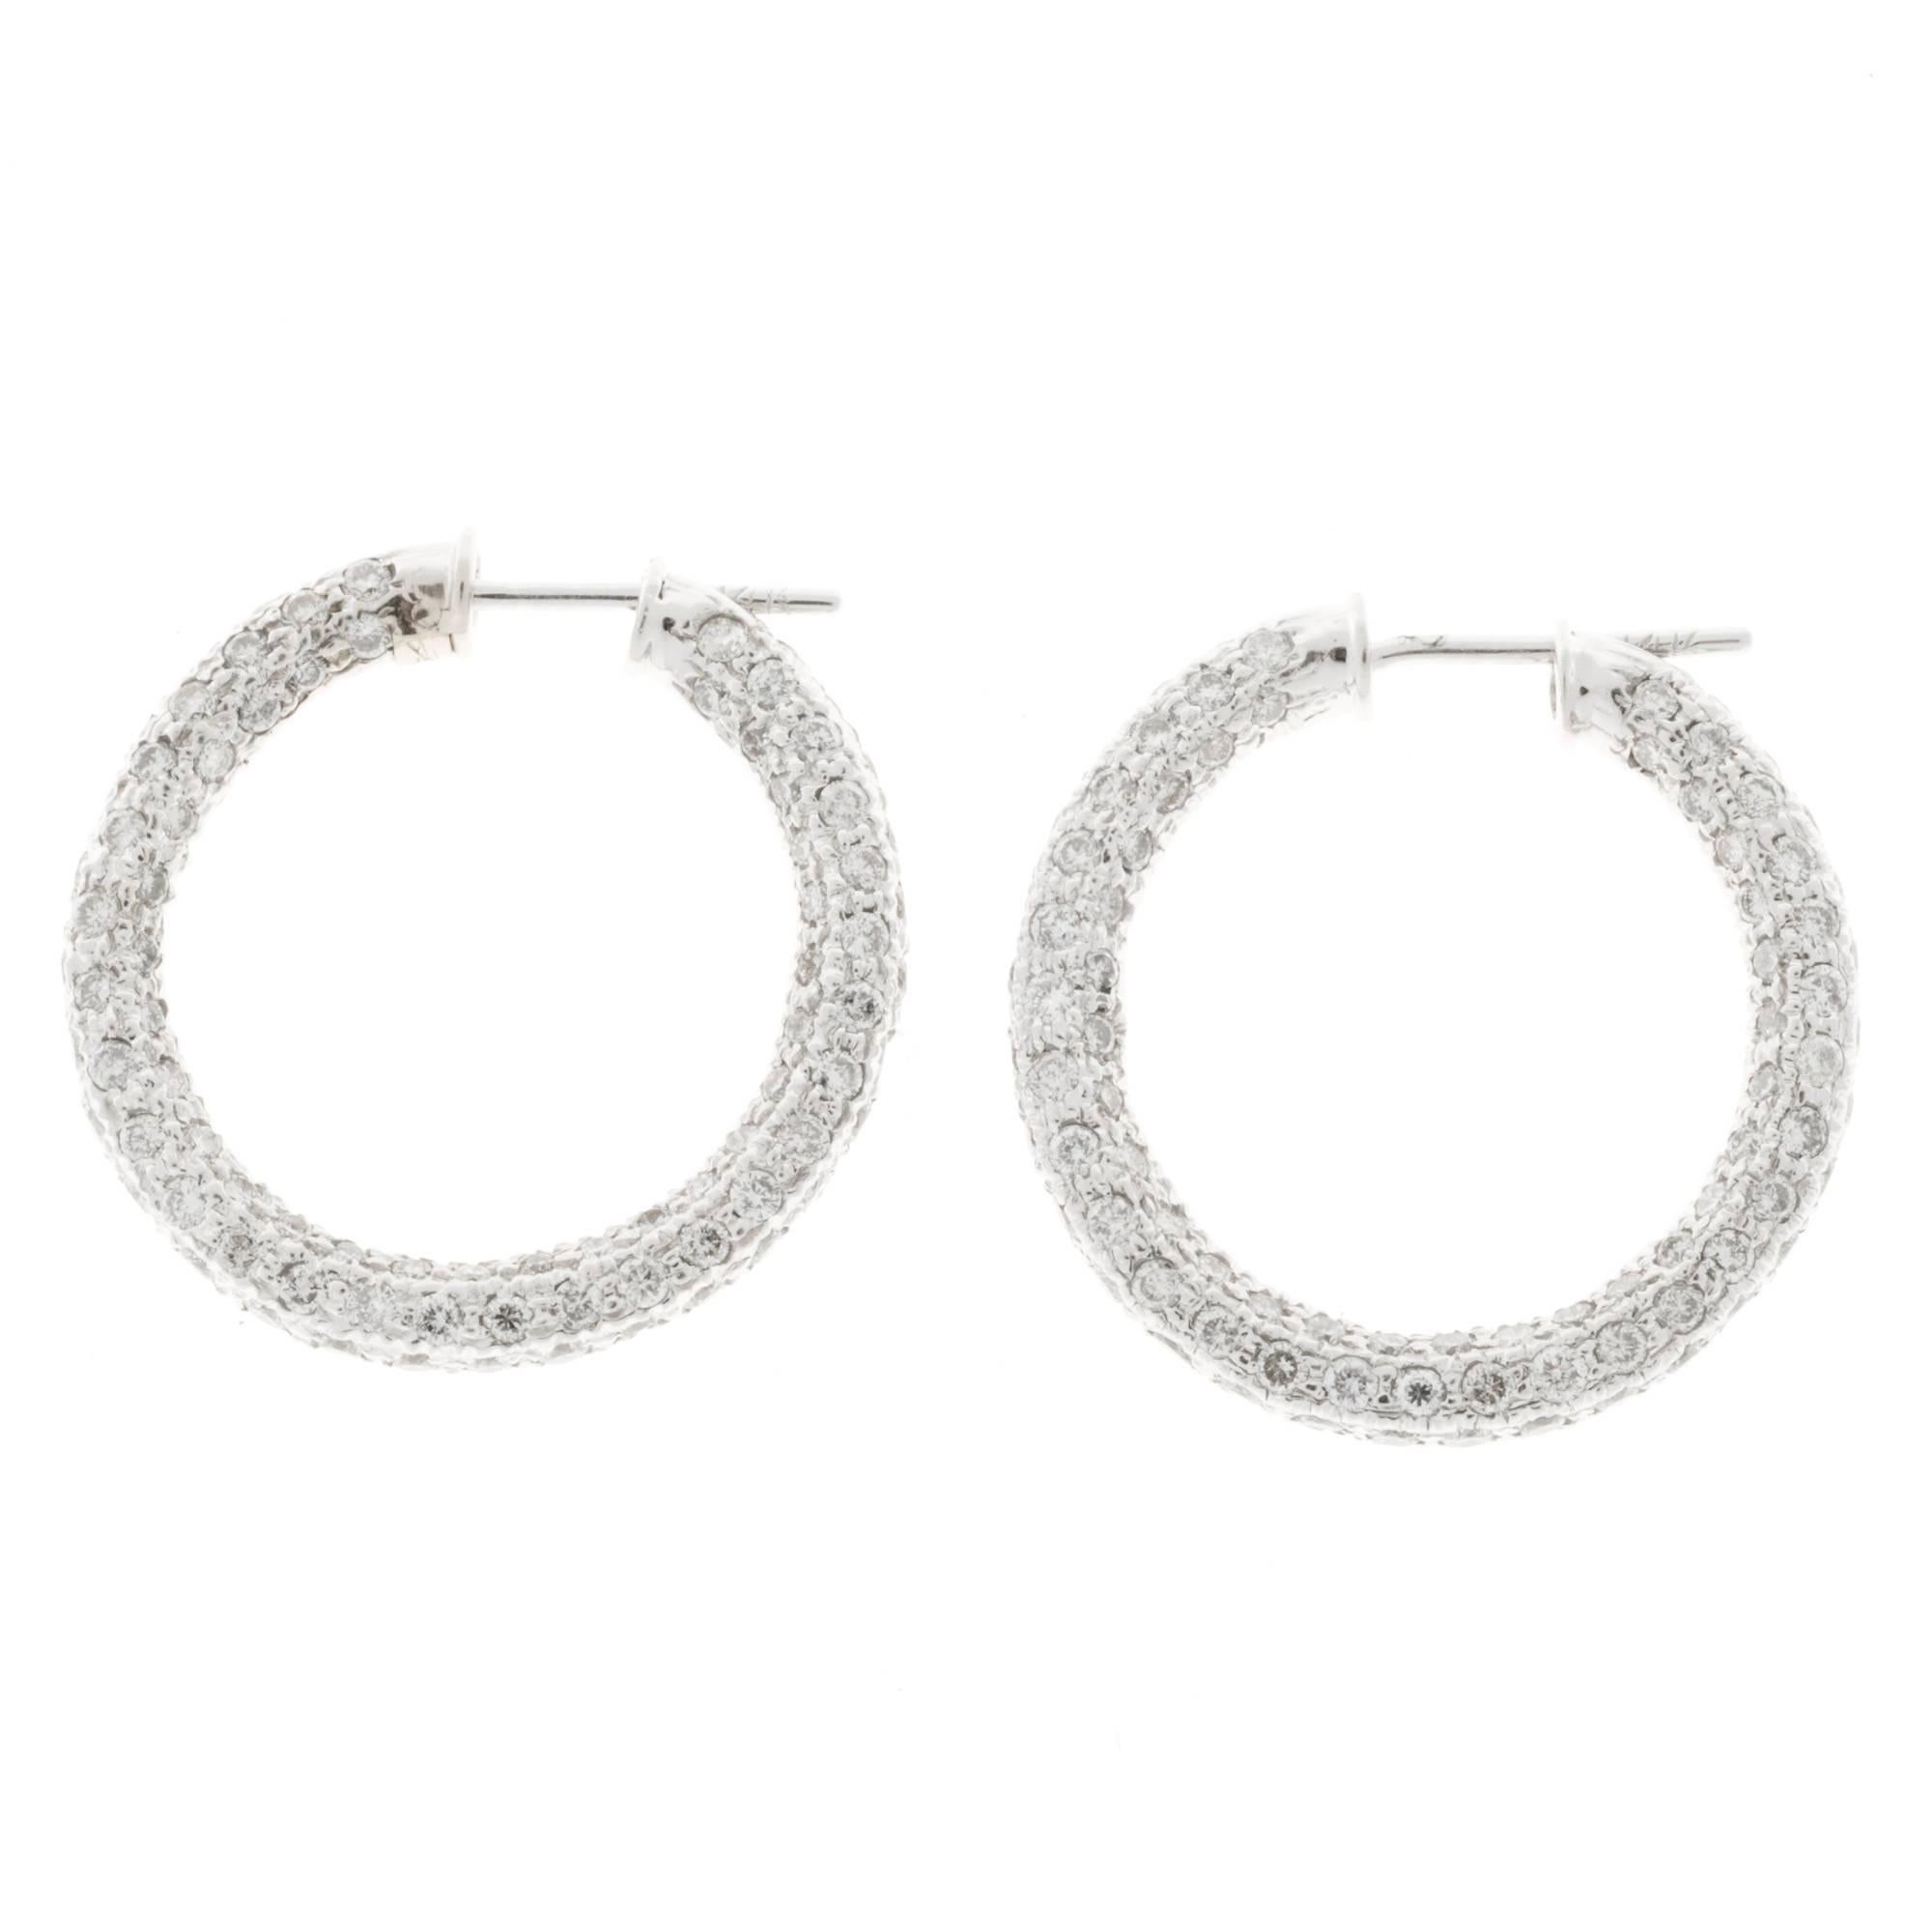 4.20ct Round Diamond Pave Link Hoop 14k white gold Gold Earrings. 1 inch around, 3.5mm round pave set diamond earrings

24 round full cut diamonds, approx. total weight 4.20cts, H, VS – SI
14k white gold
Tested and stamped: 14k
6.1 grams
Top to